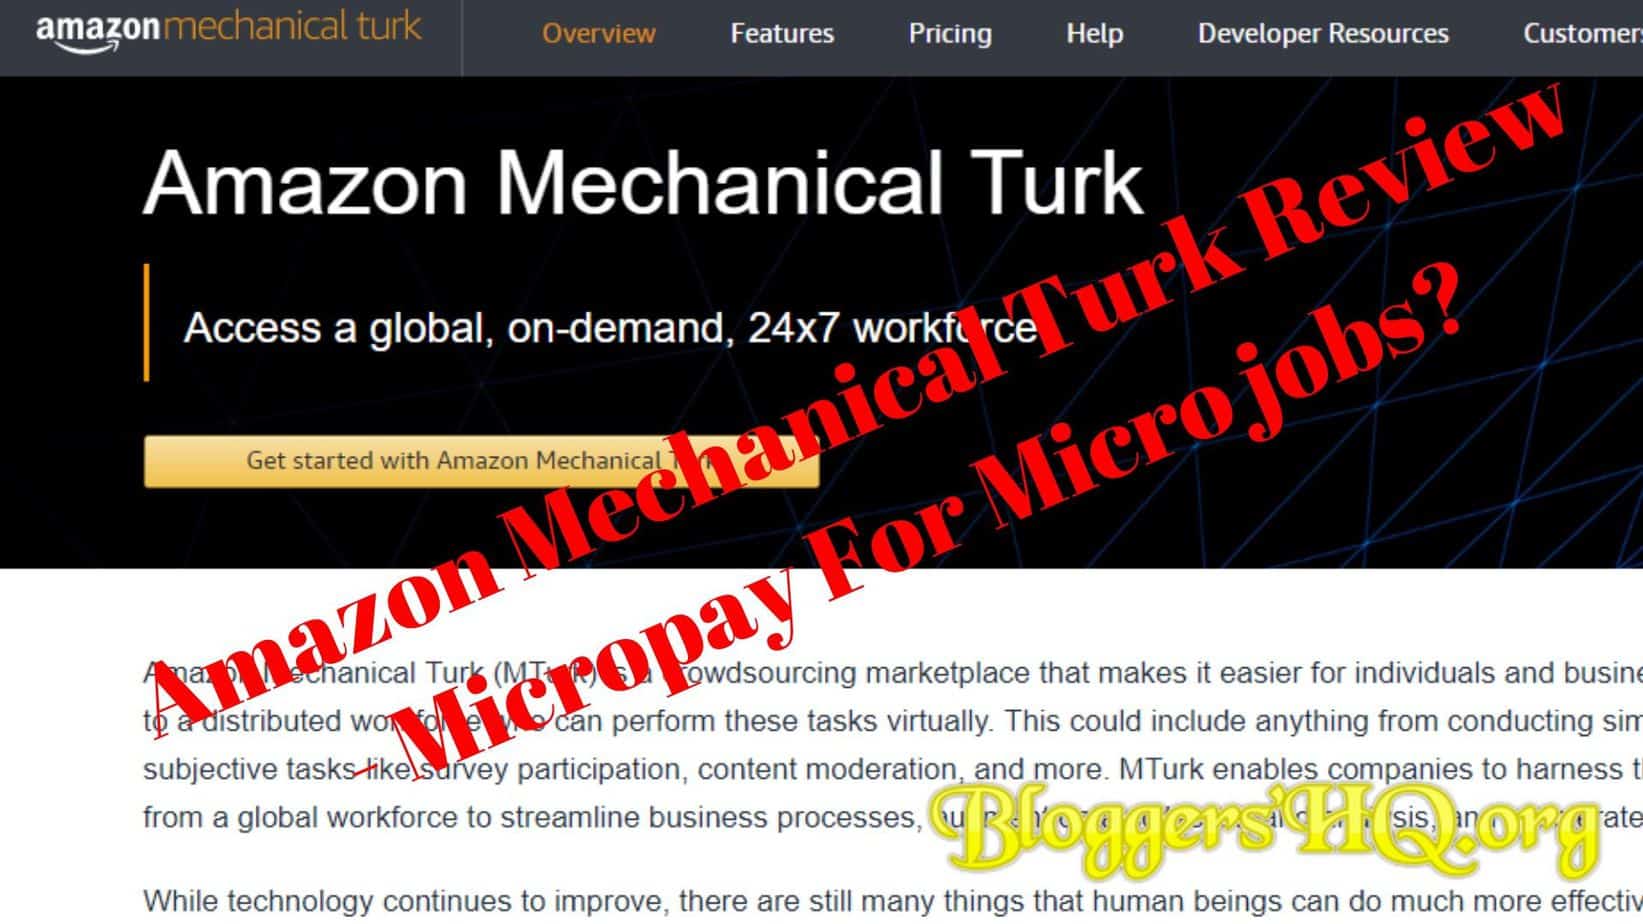 Amazon Mechanical Turk Review Micro Jobs With Micro Pay Updated Bloggershq Org,Learn How To Crochet A Scarf